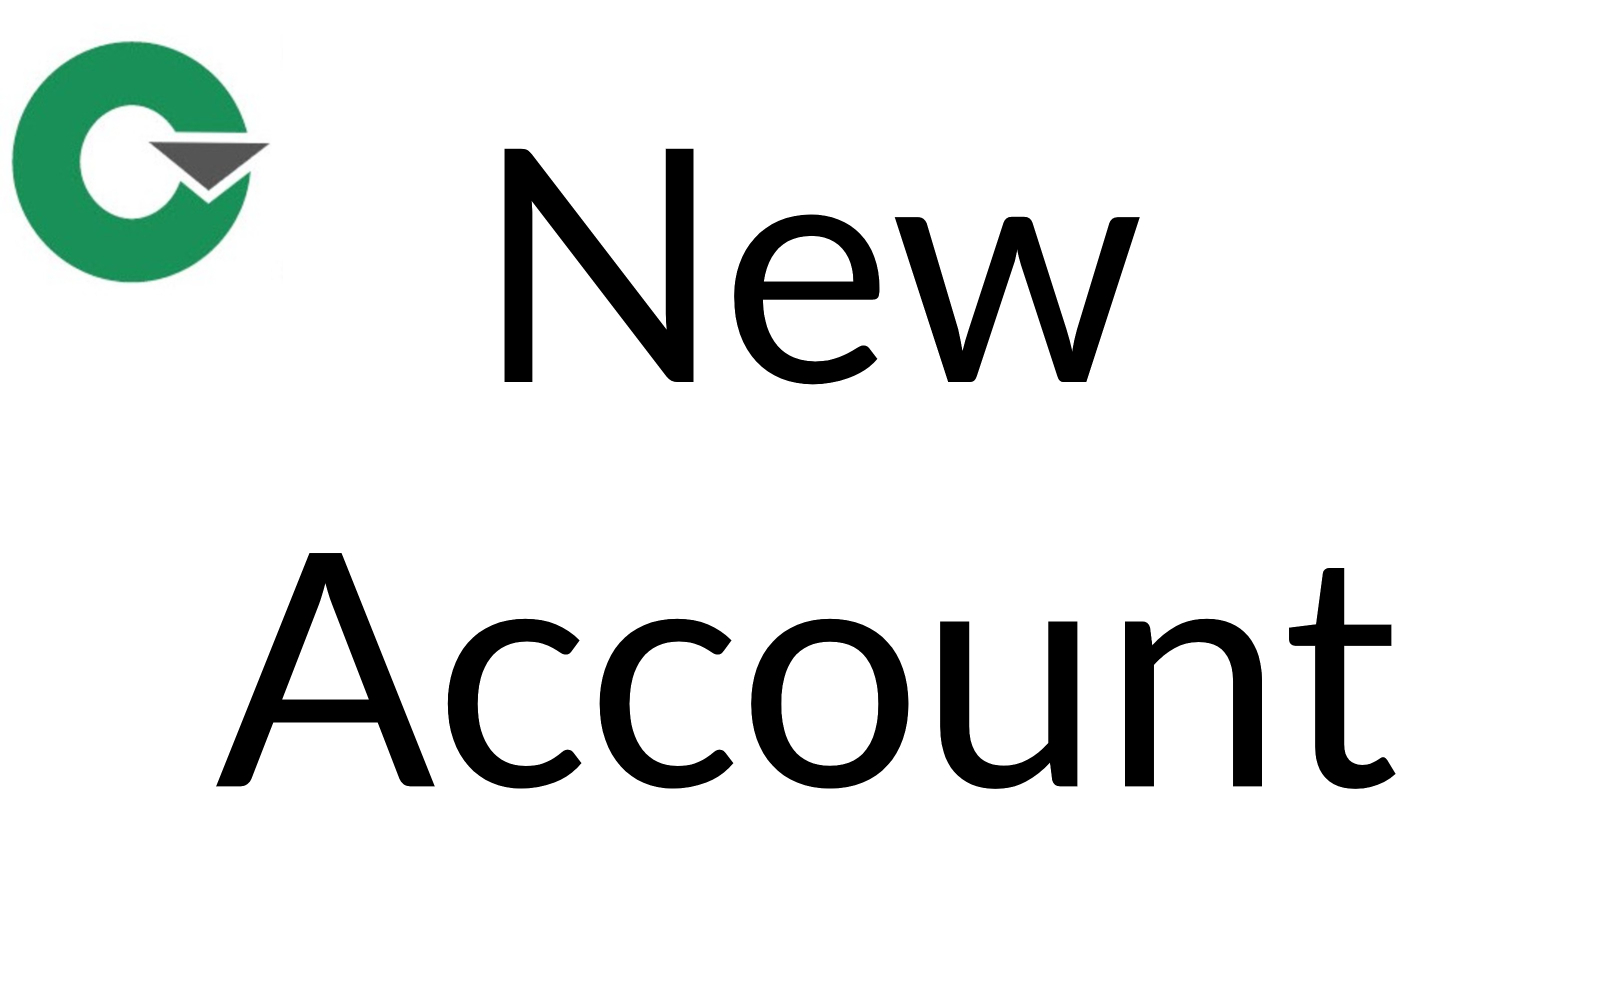 01 - New Account and Subscribing